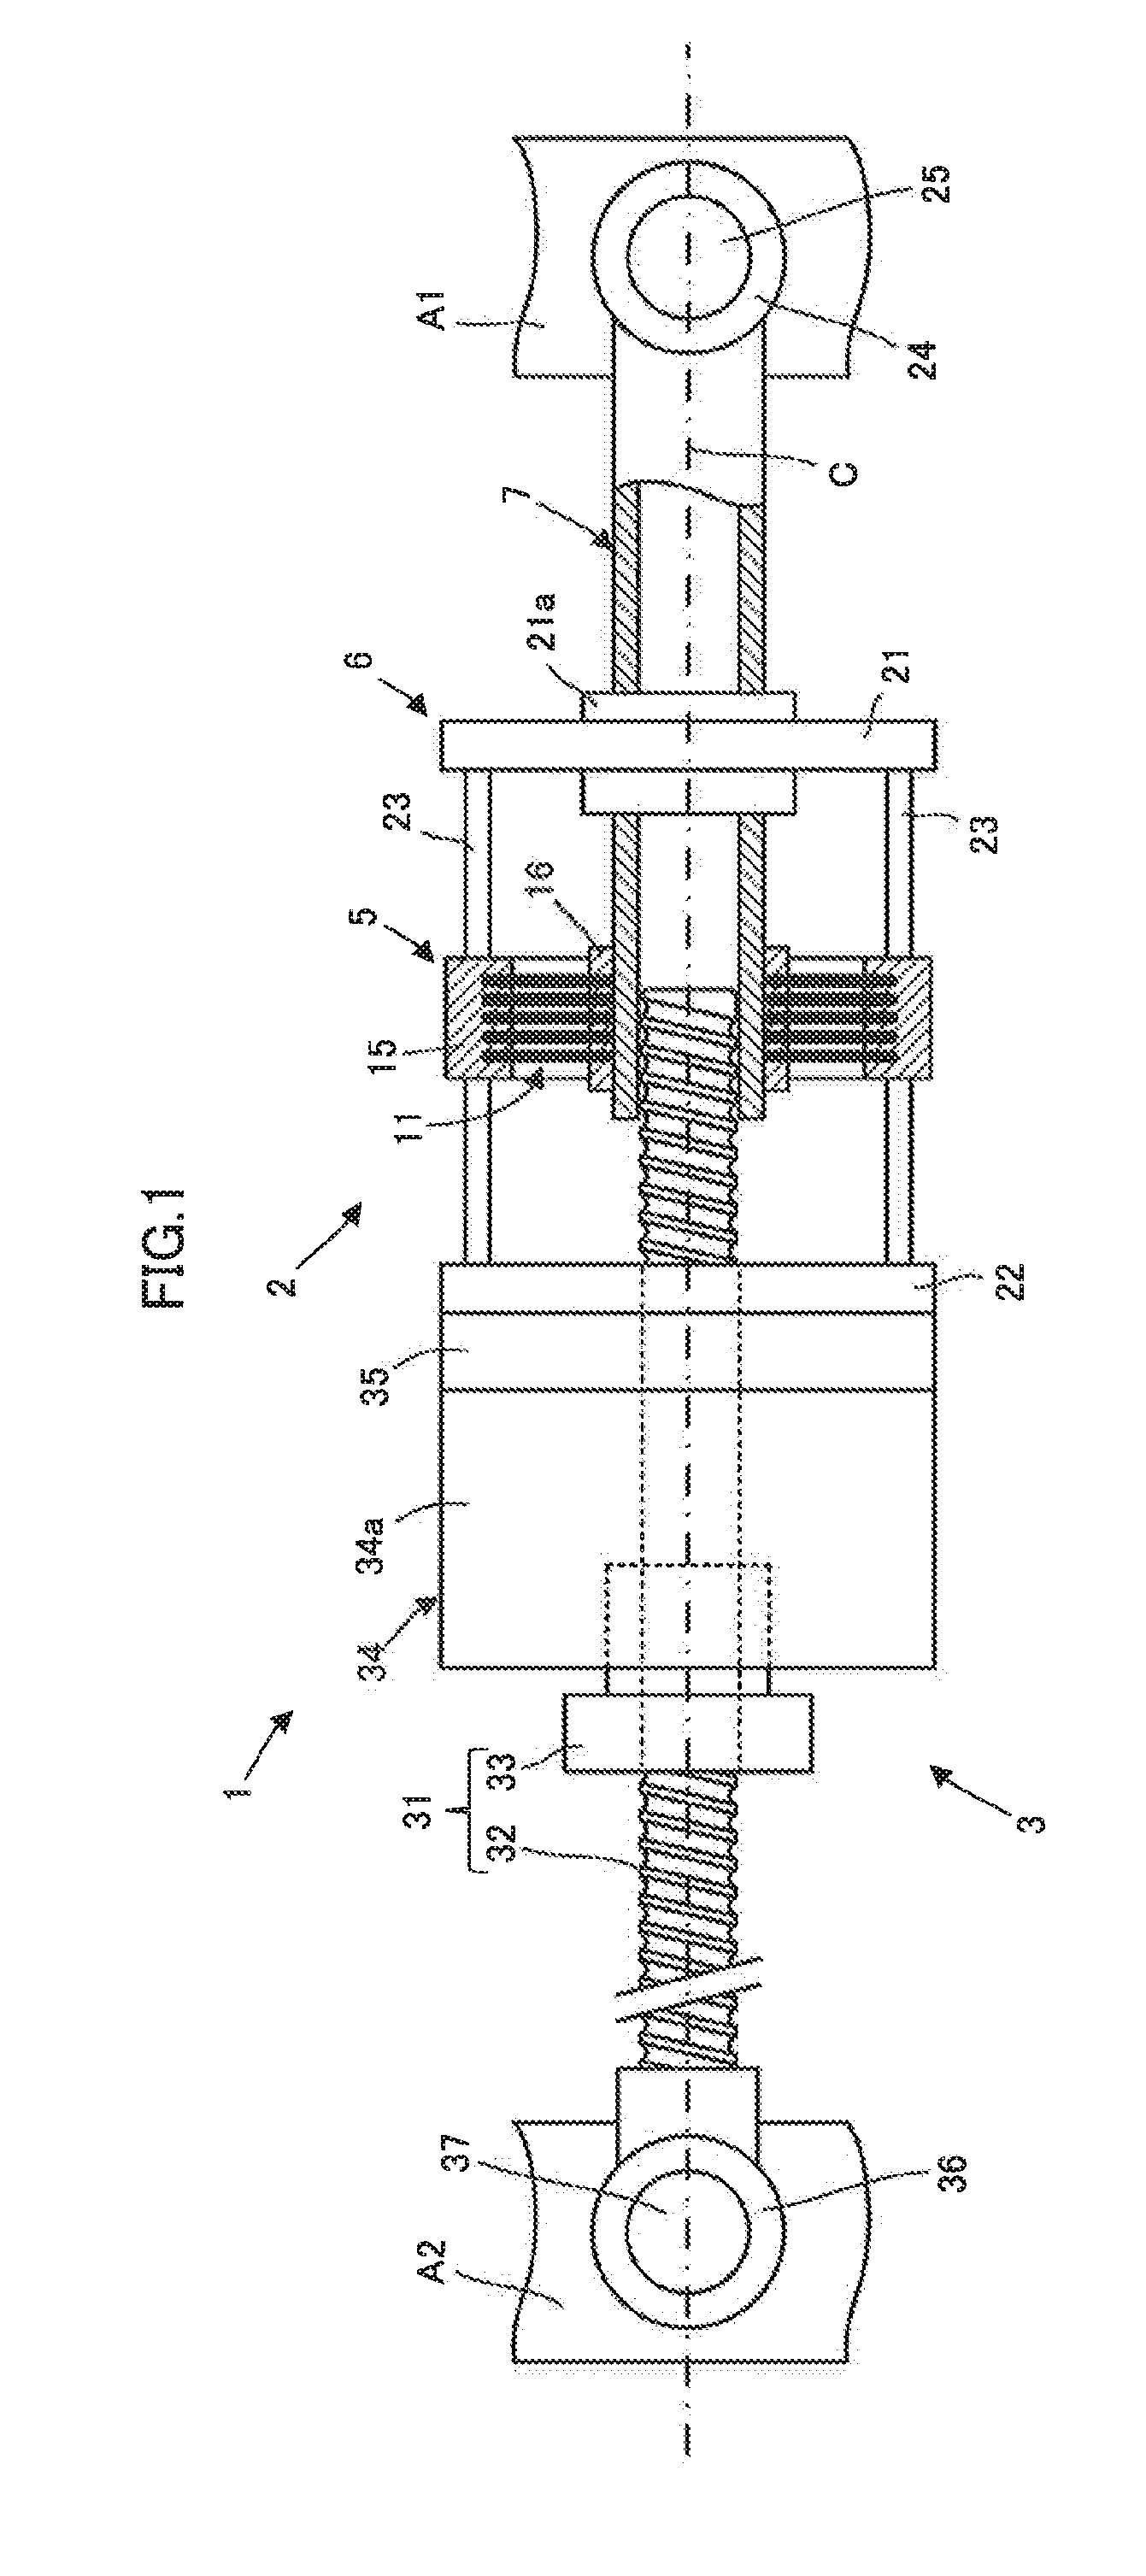 Spring mechanism and linear motion displacement mechanism